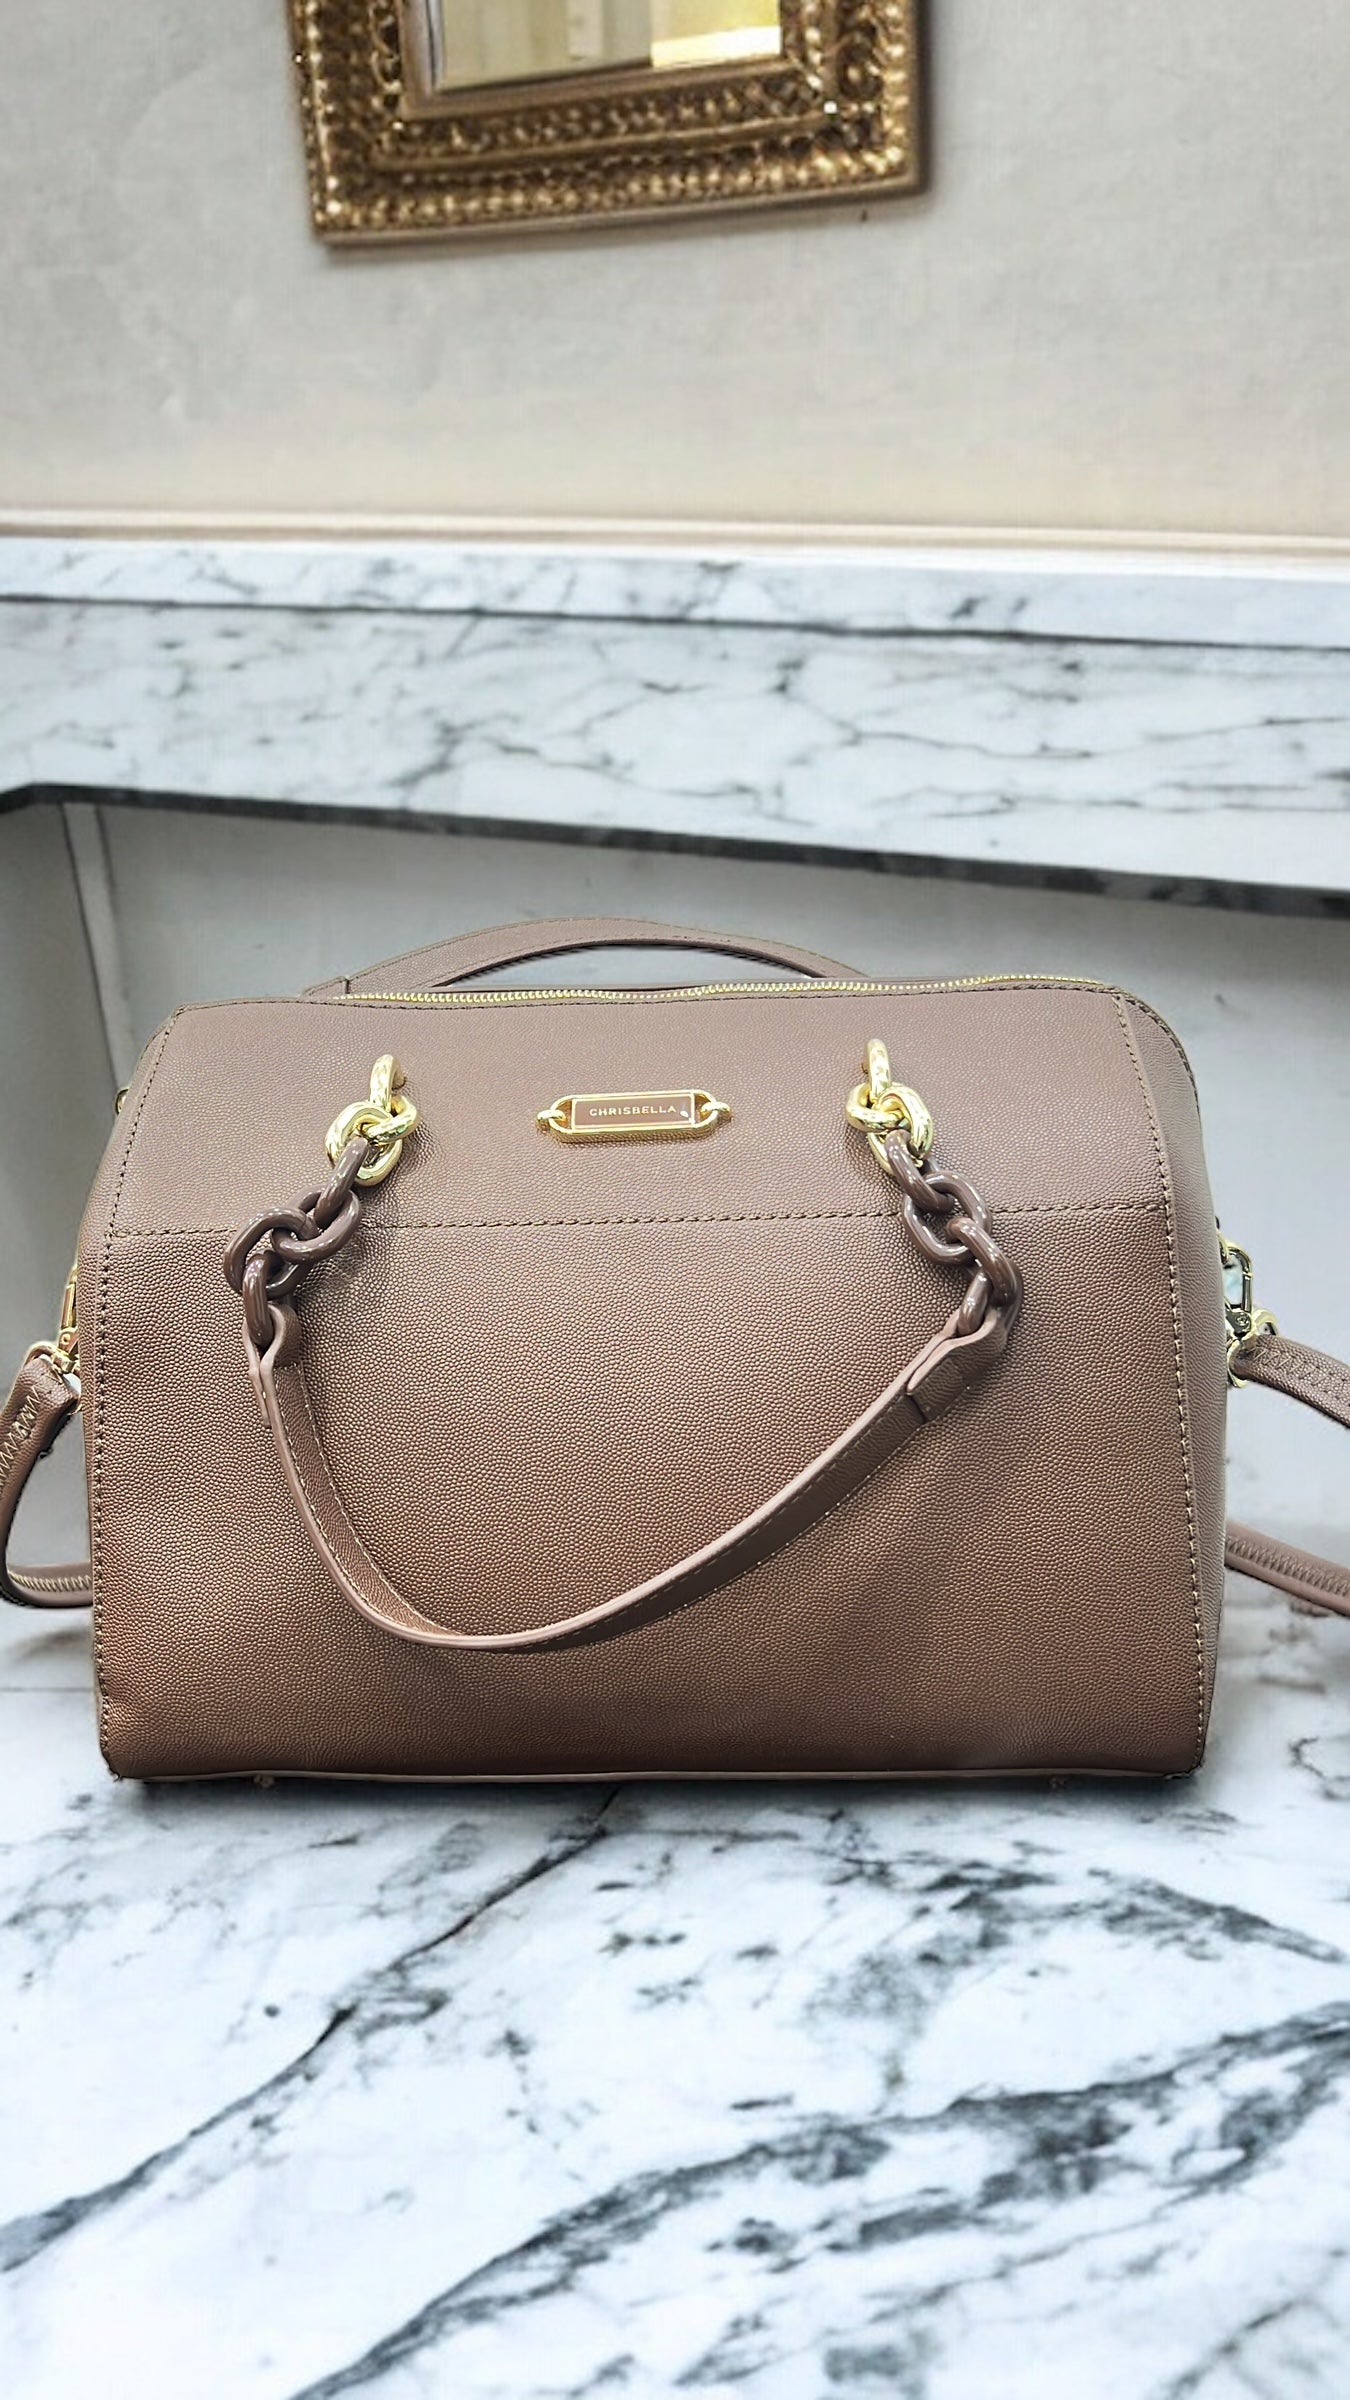 CHRISBELLA TEXTURED DOCTOR BAG IN COFFEE